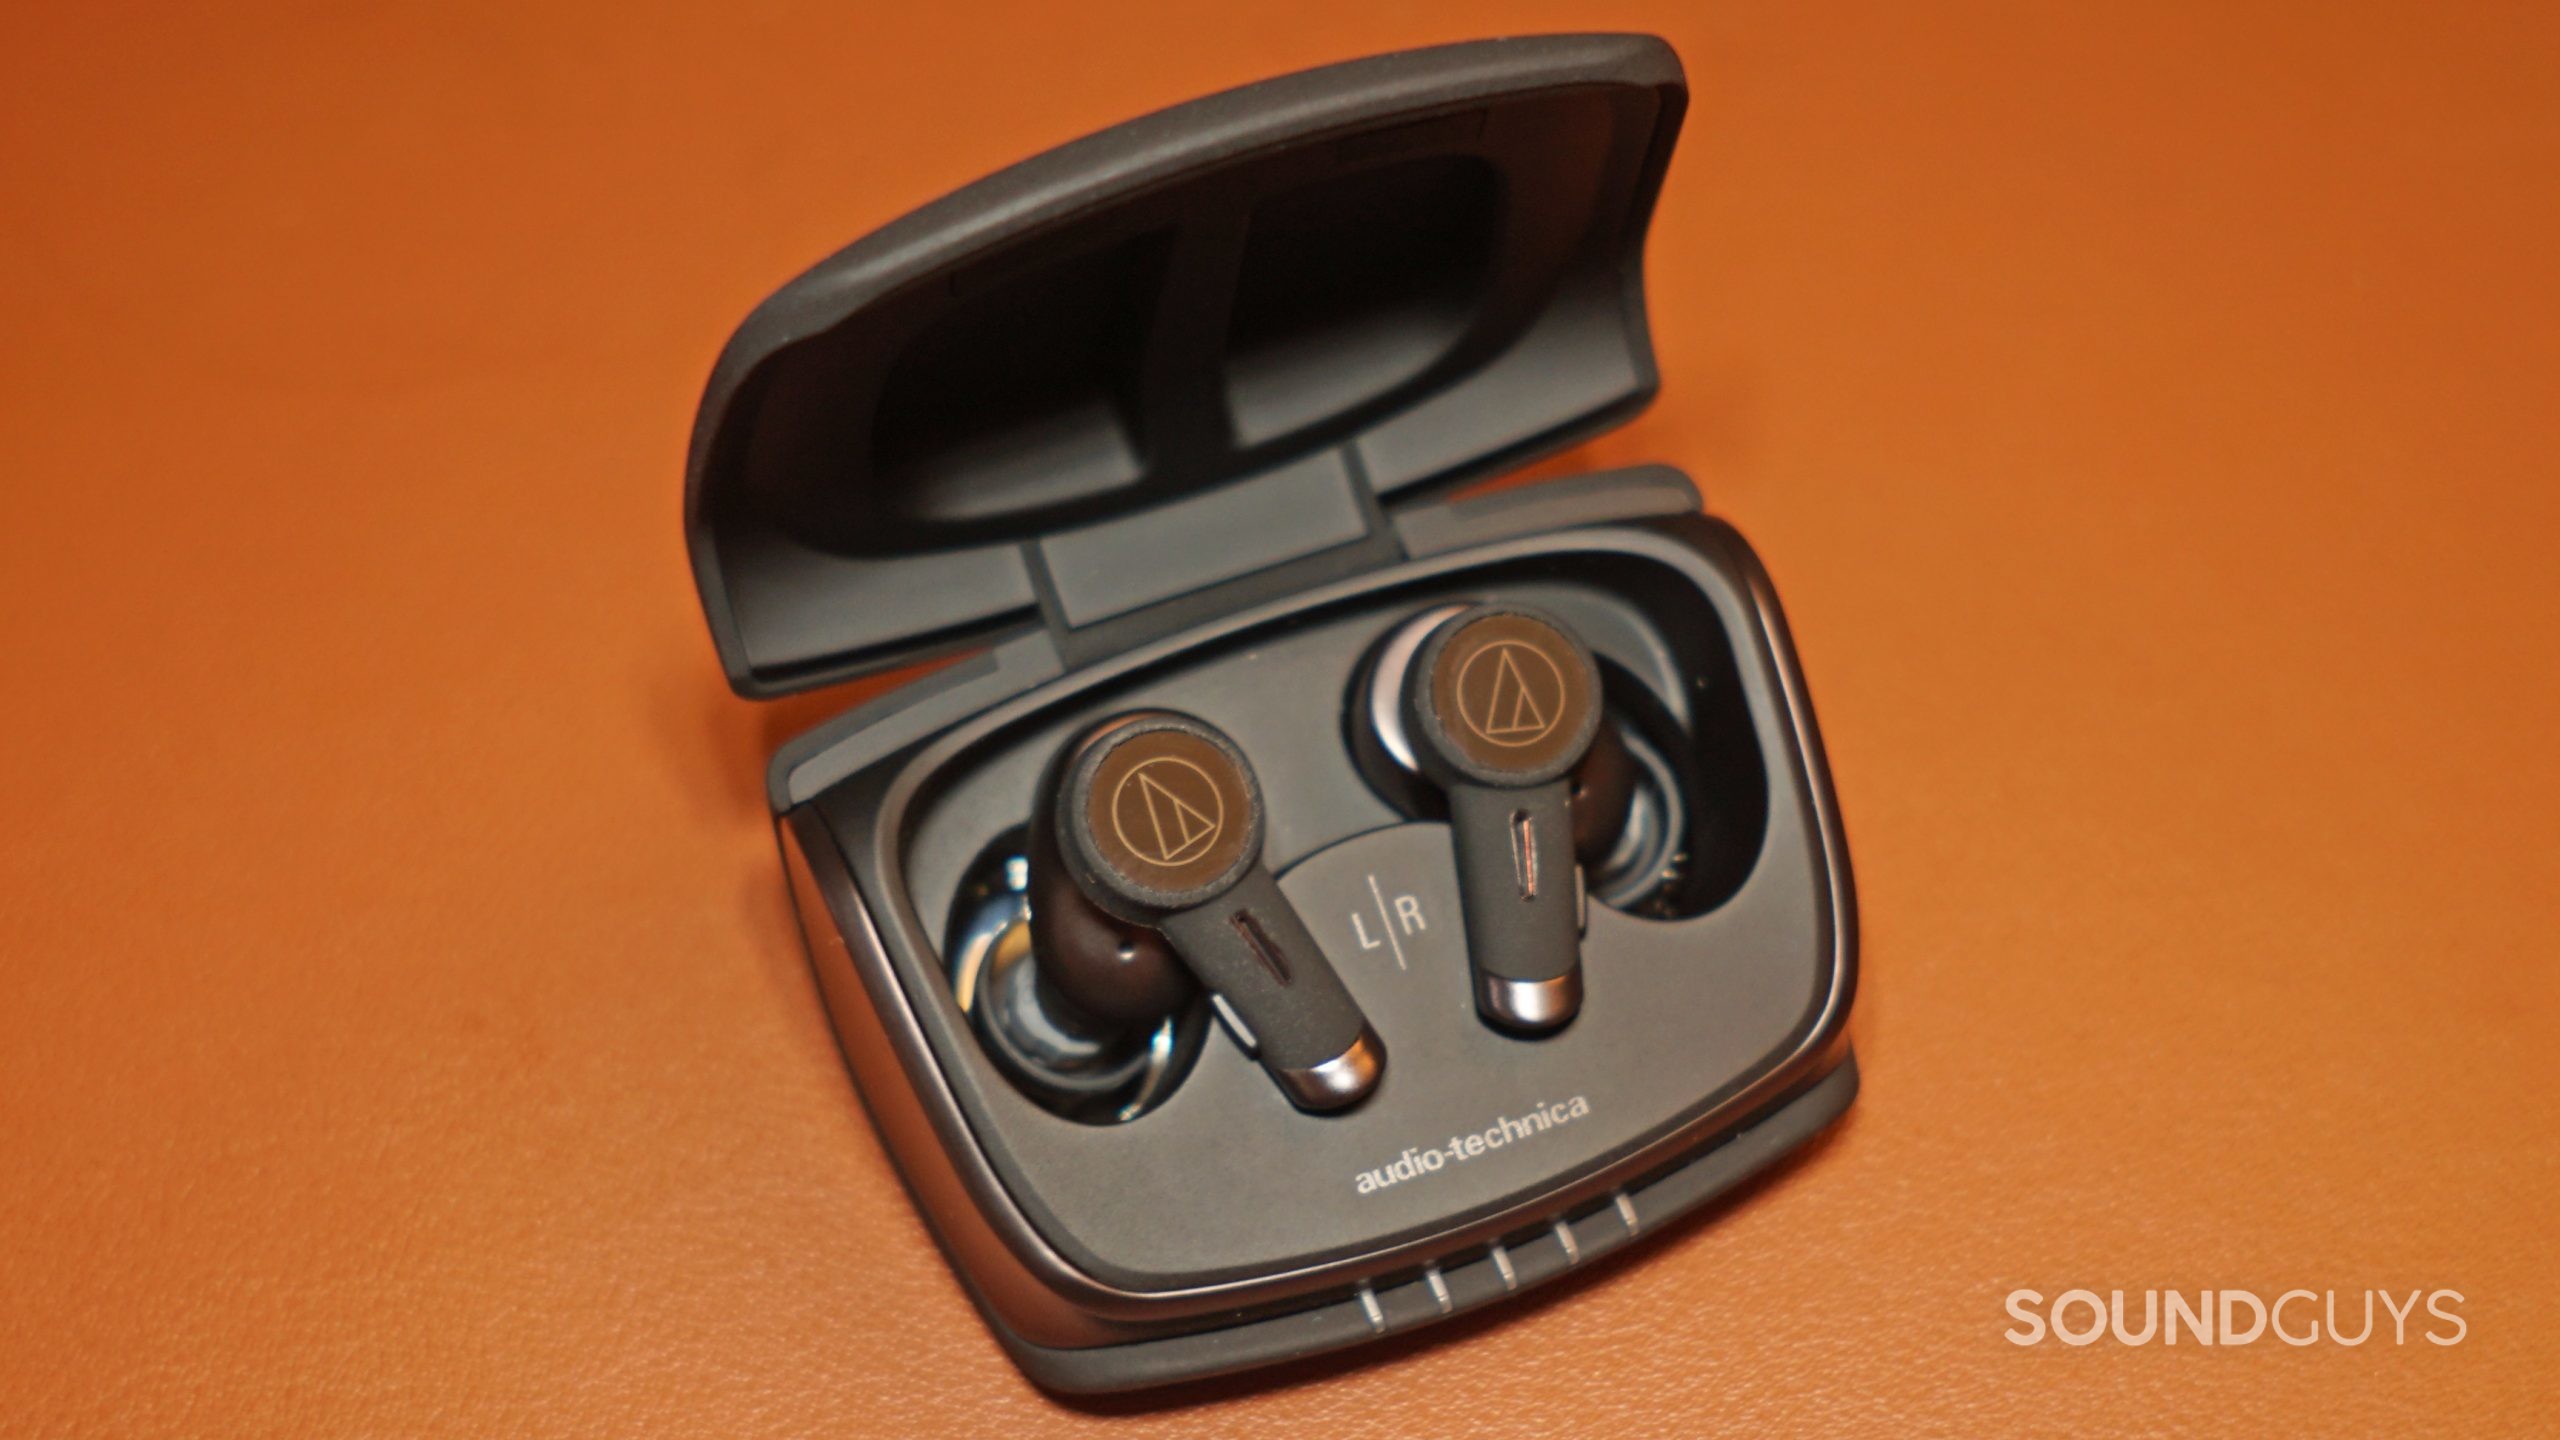 The Audio-Technica ATH-TWX9 earbuds sit in their charing case on a leather surface..